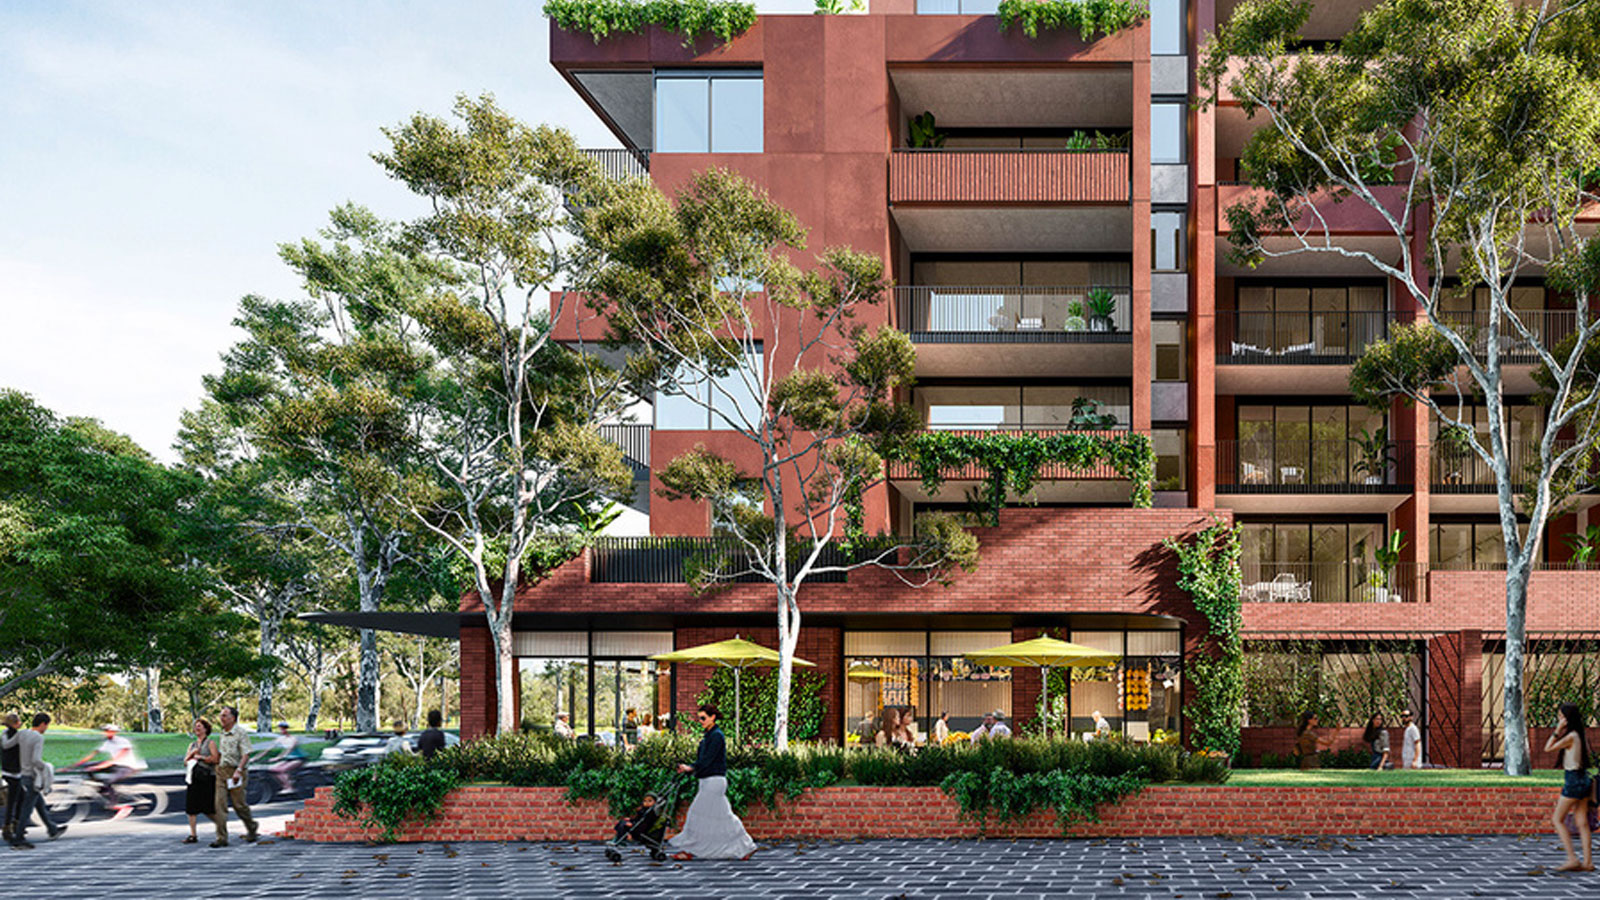 ▲ Mirvac and Milieu are planned 527 build-to-rent units on a 1ha site in Melbourne’s inner north.